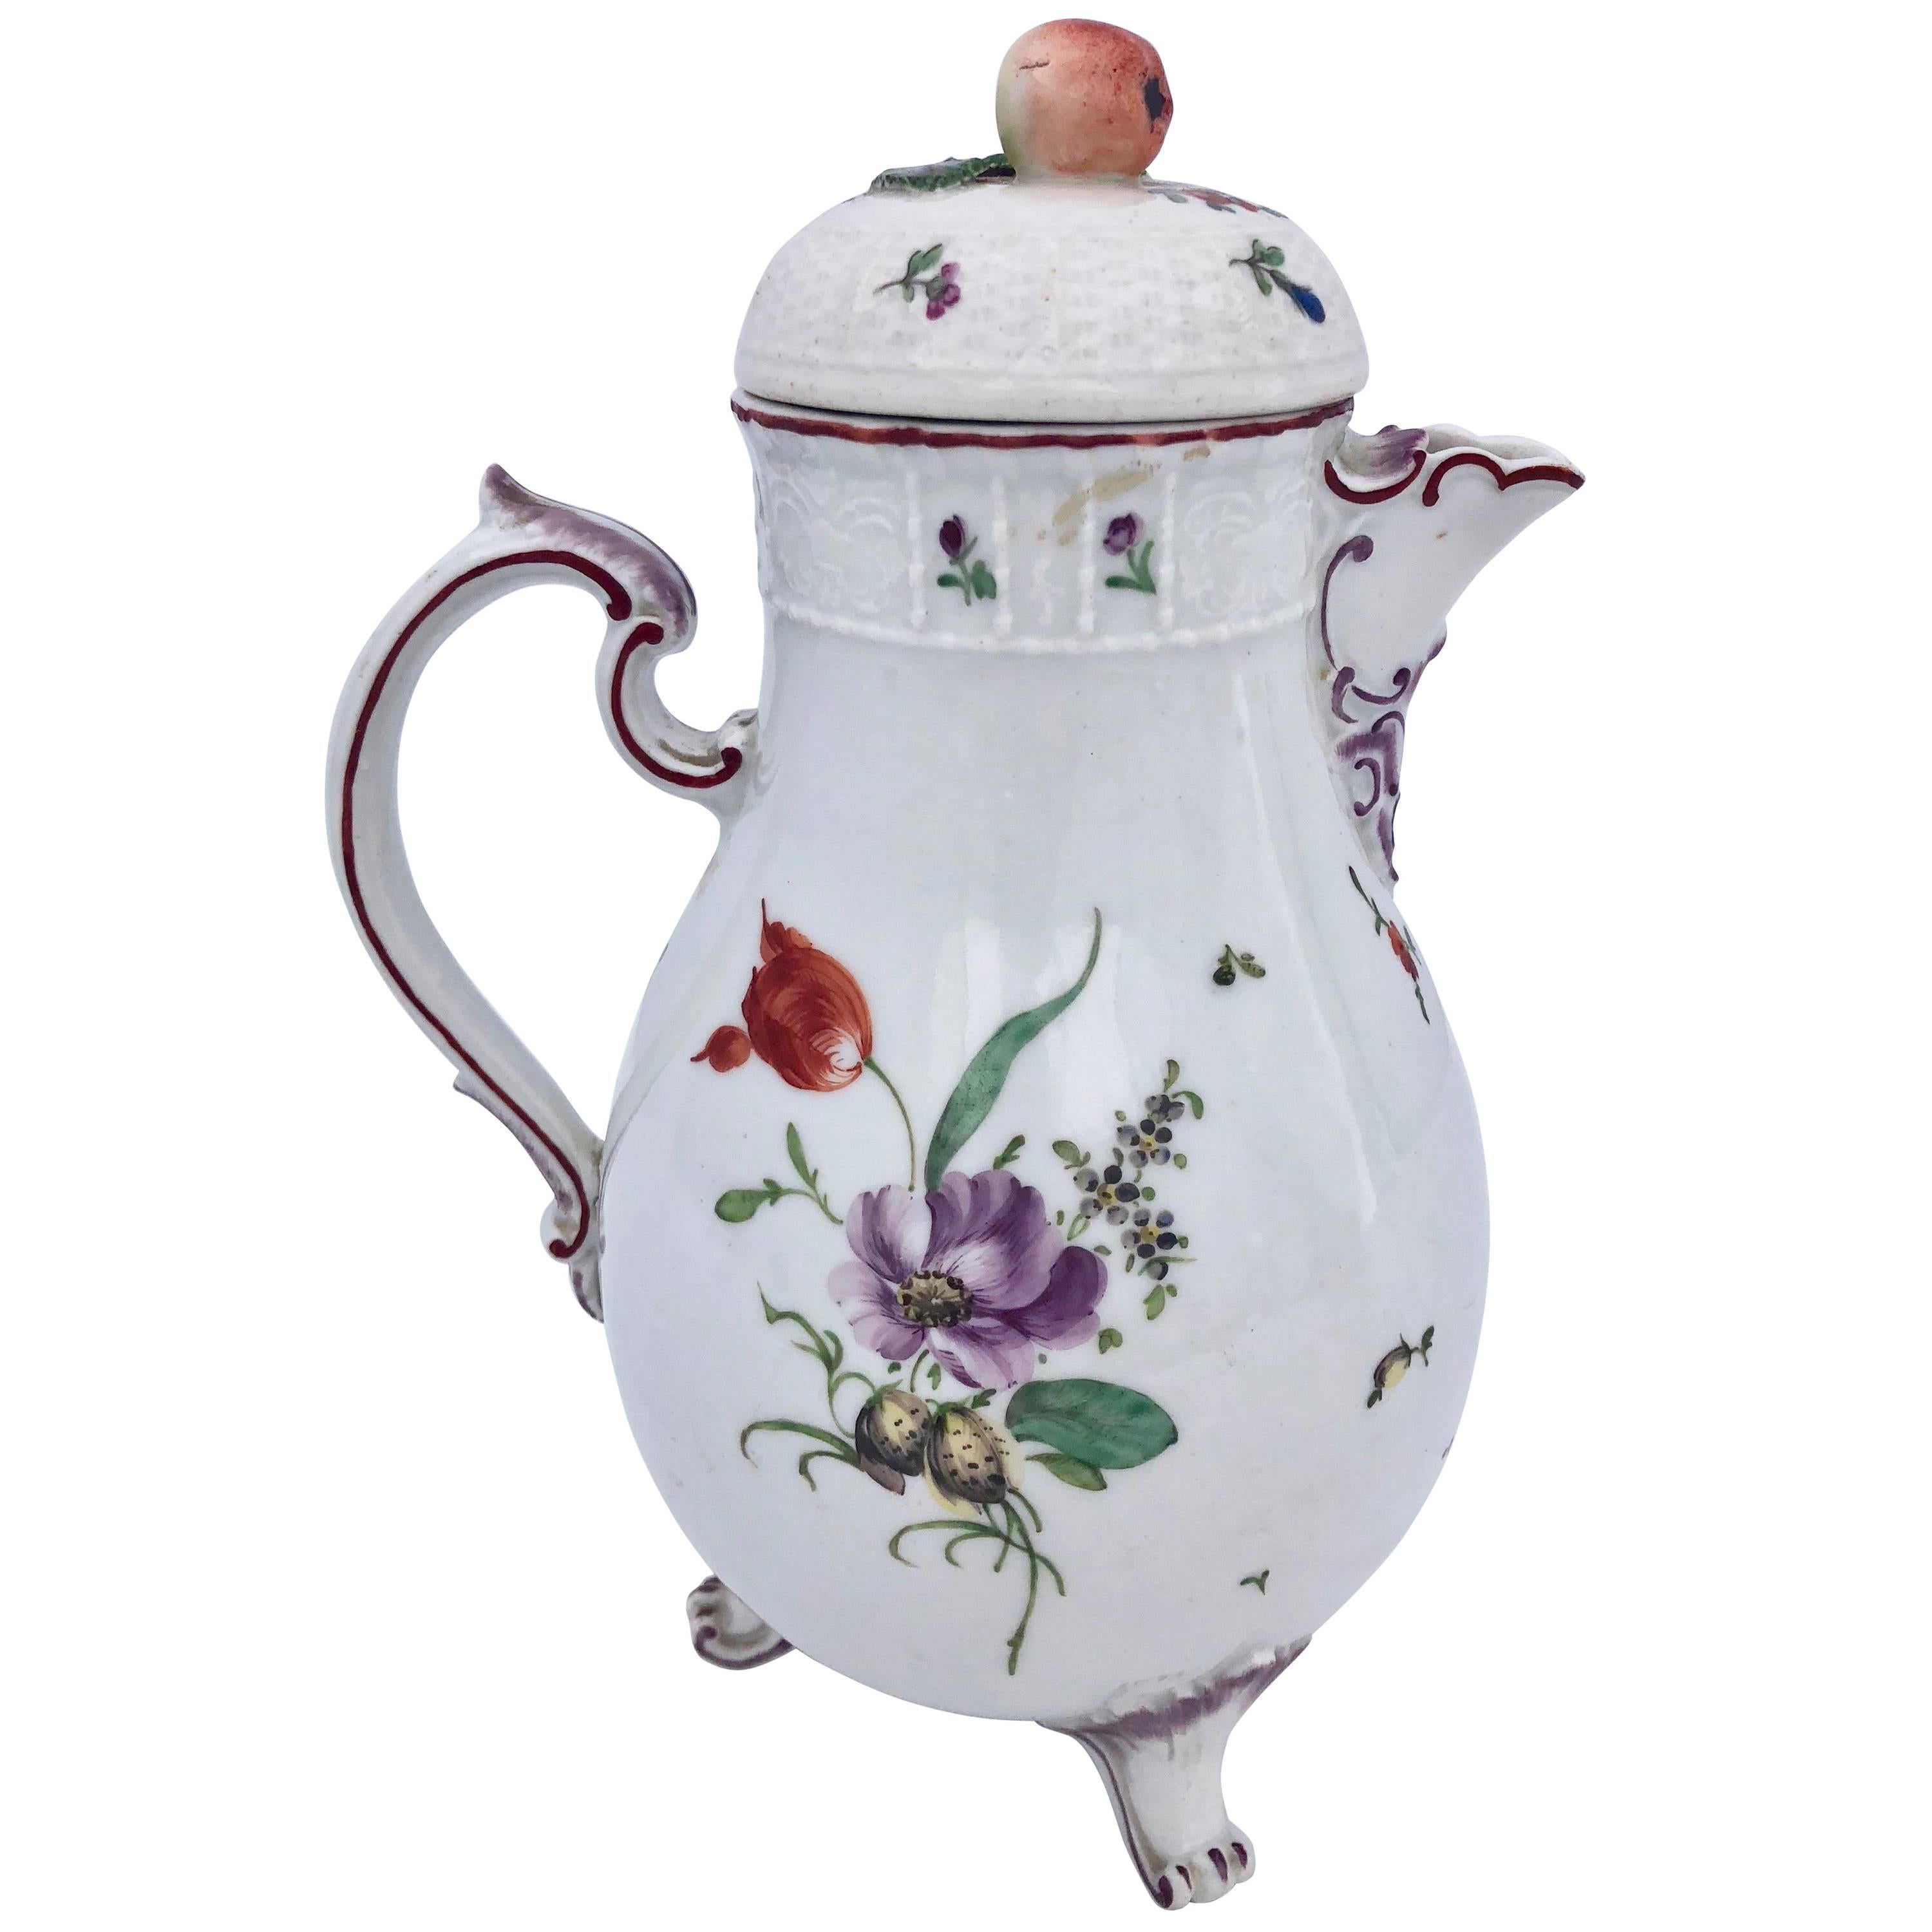 German Louisbourg Faïence Tea Pot with Flower motif and Apple on the Top, 1800s